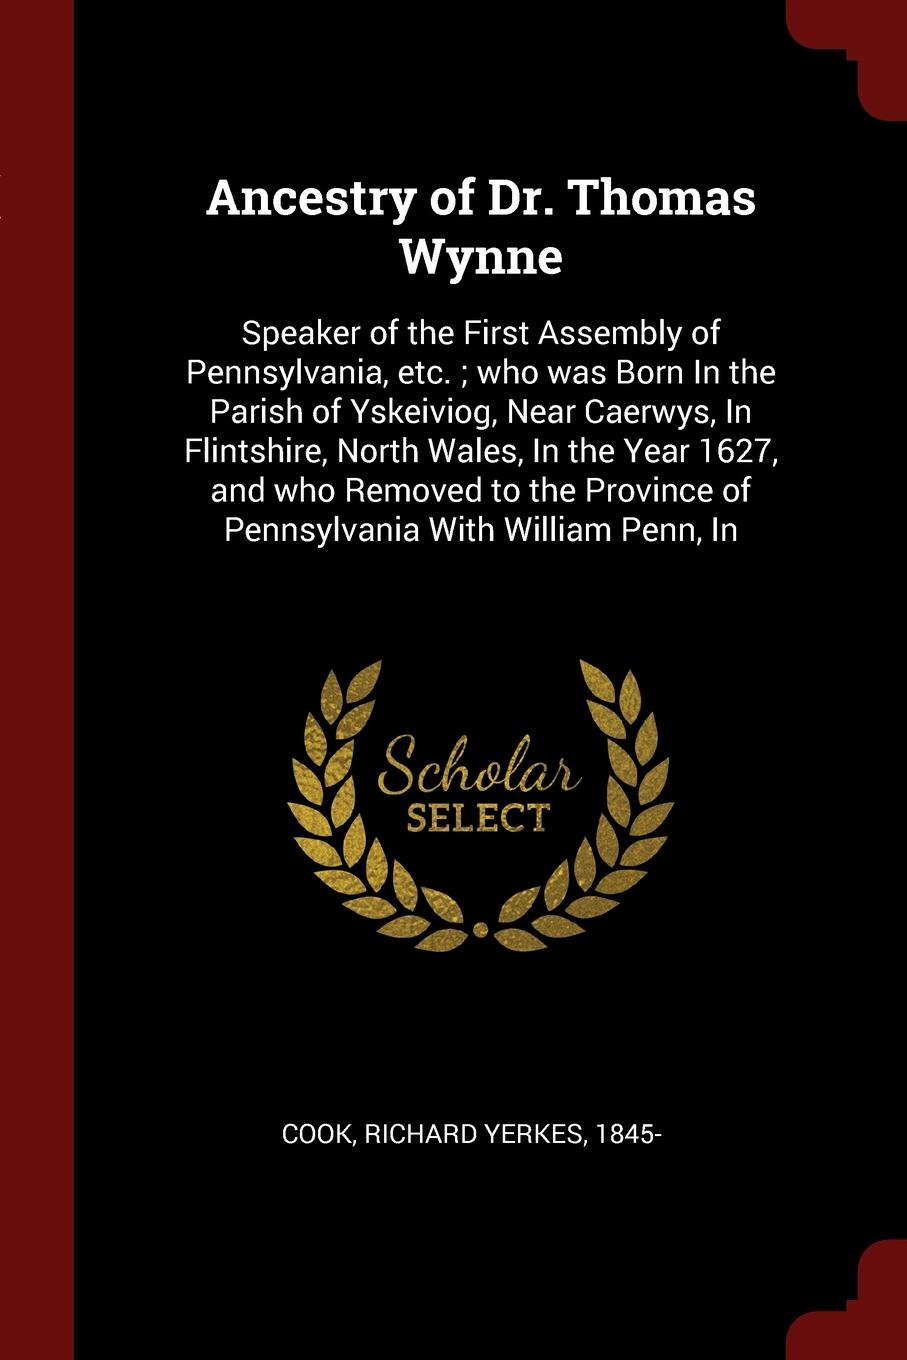 Ancestry of Dr. Thomas Wynne. Speaker of the First Assembly of Pennsylvania, etc. ; who was Born In the Parish of Yskeiviog, Near Caerwys, In Flintshire, North Wales, In the Year 1627, and who Removed to the Province of Pennsylvania With William P...